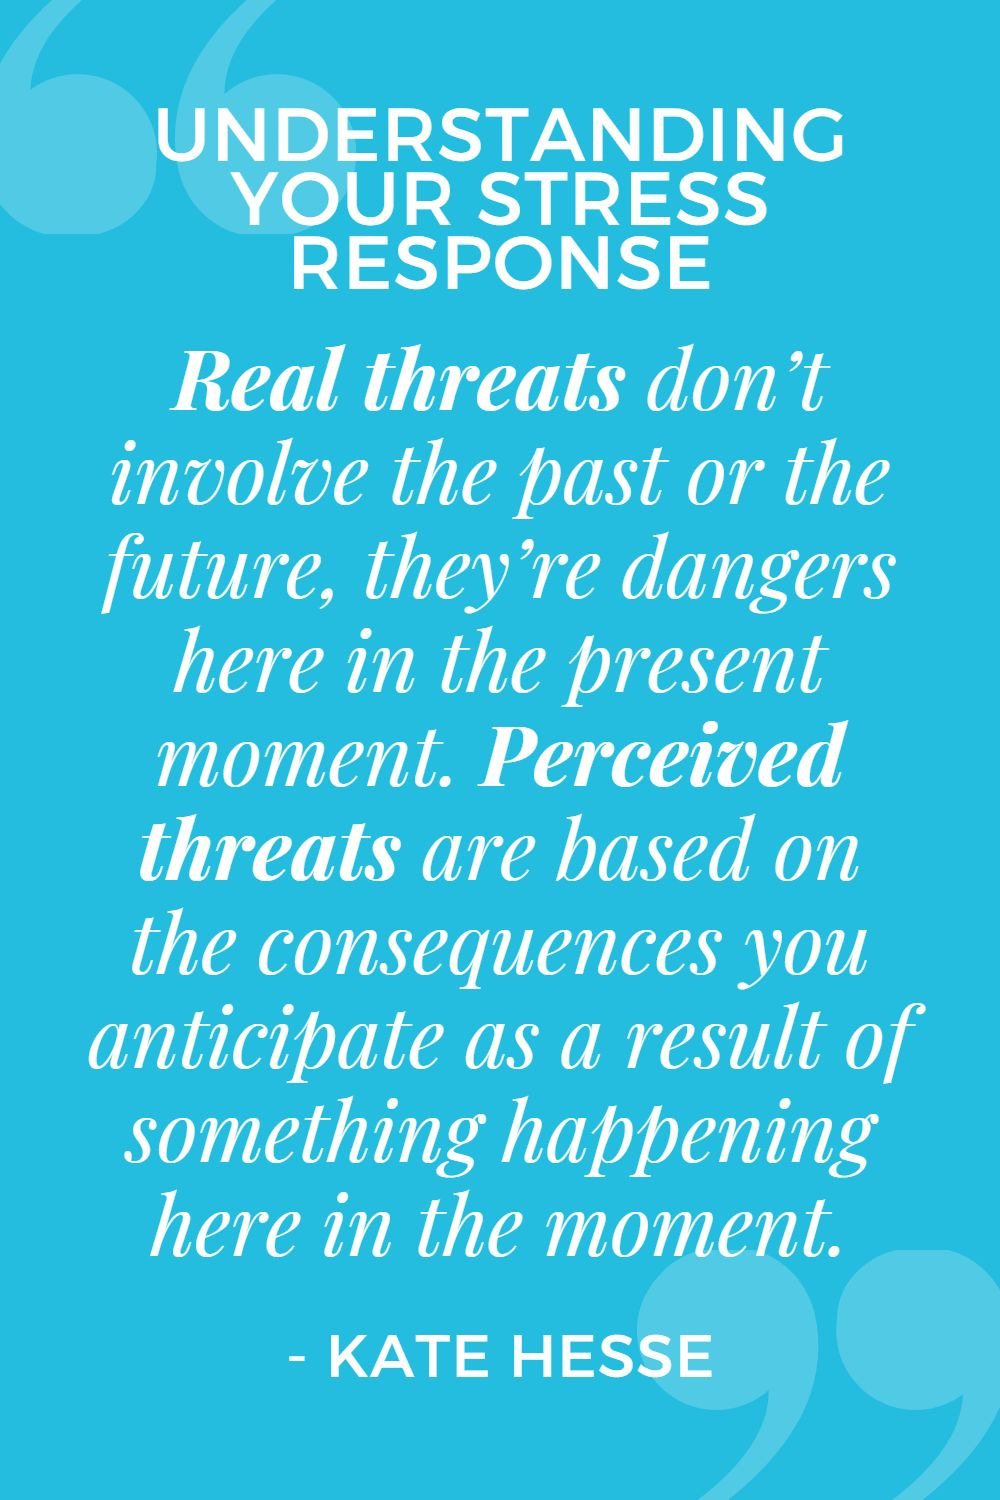 Real threats don't involve the past or the future, they're dangers here in the present moment. Perceived threats are based on the consequences you anticipate as a result of something happening here in the moment.